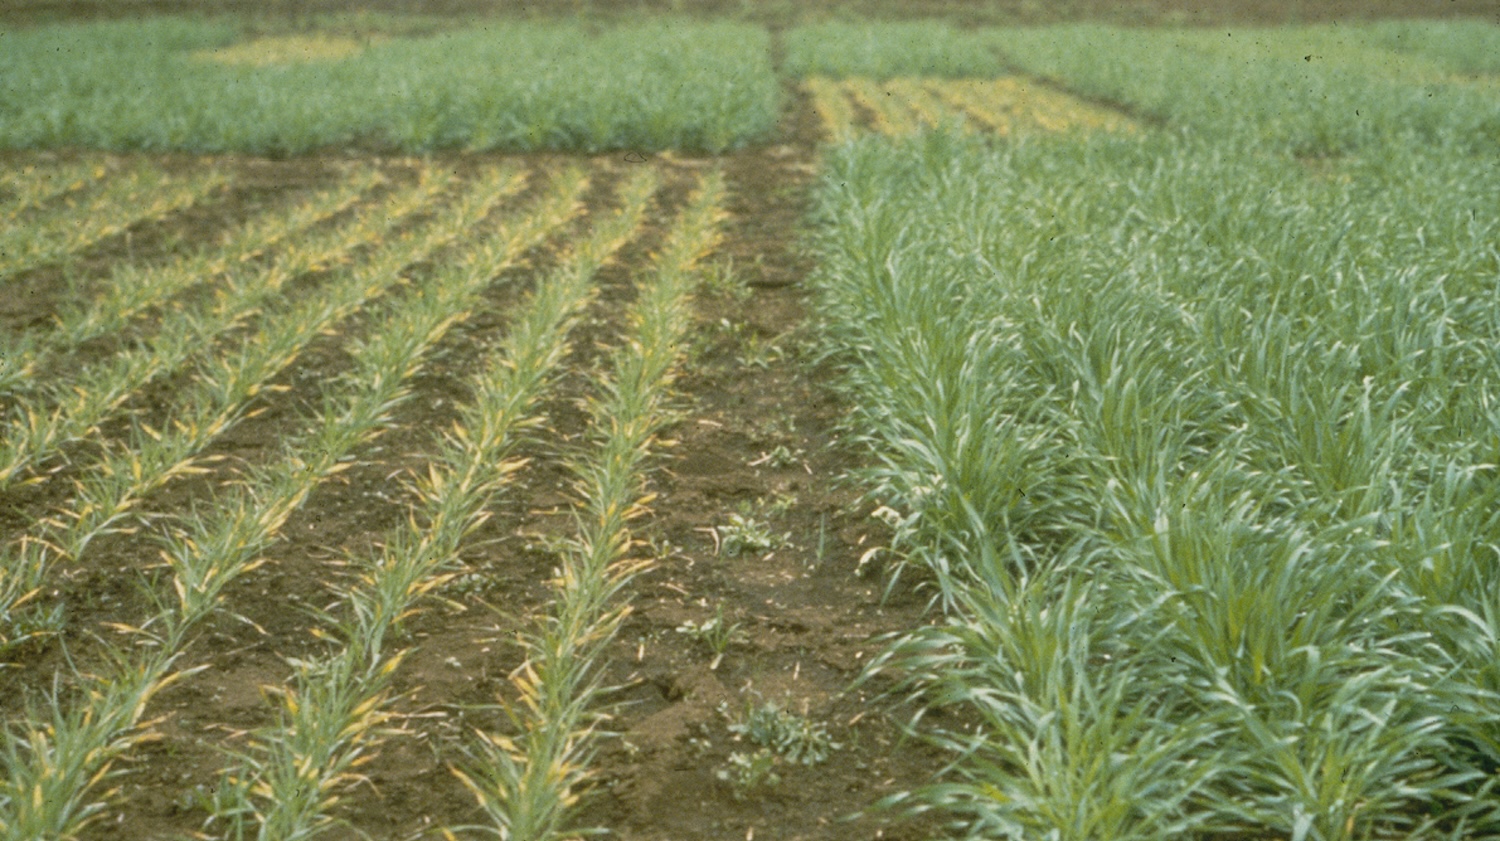 research test plots showing wheat plants of different sizes